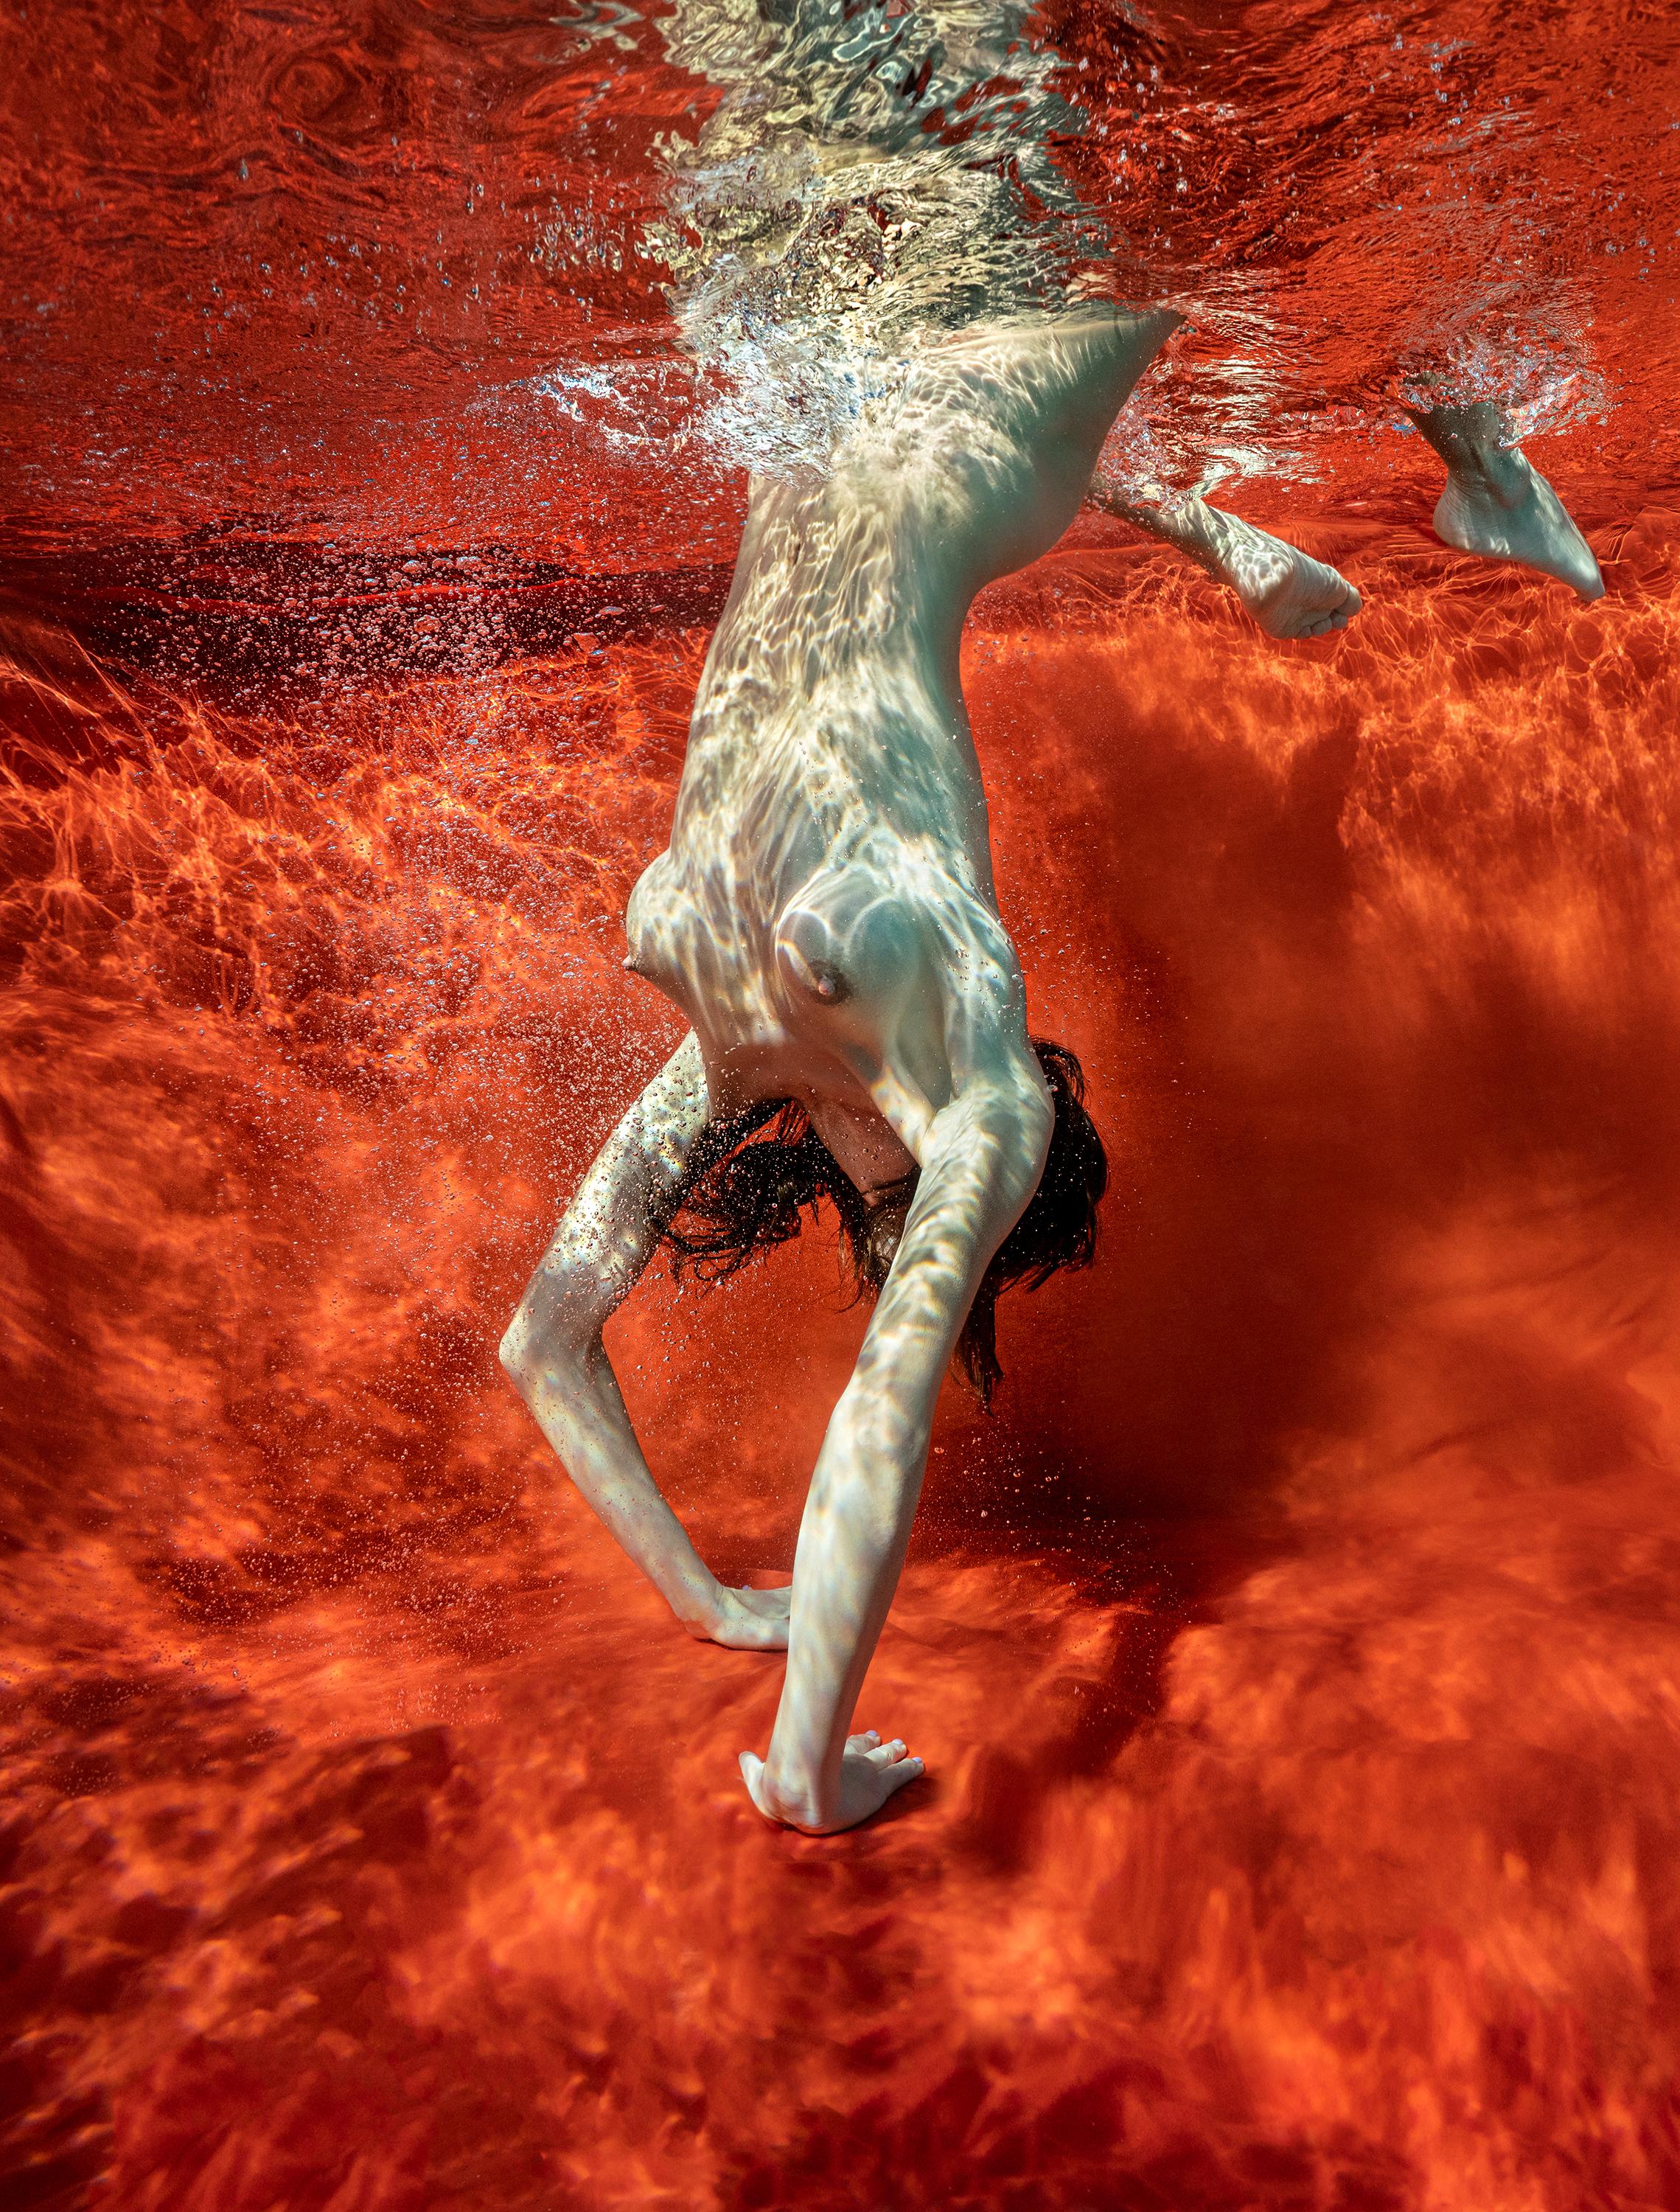 Alex Sher Figurative Photograph - Blood and Milk VIII - underwater nude photograph - archival pigment print 35x26"